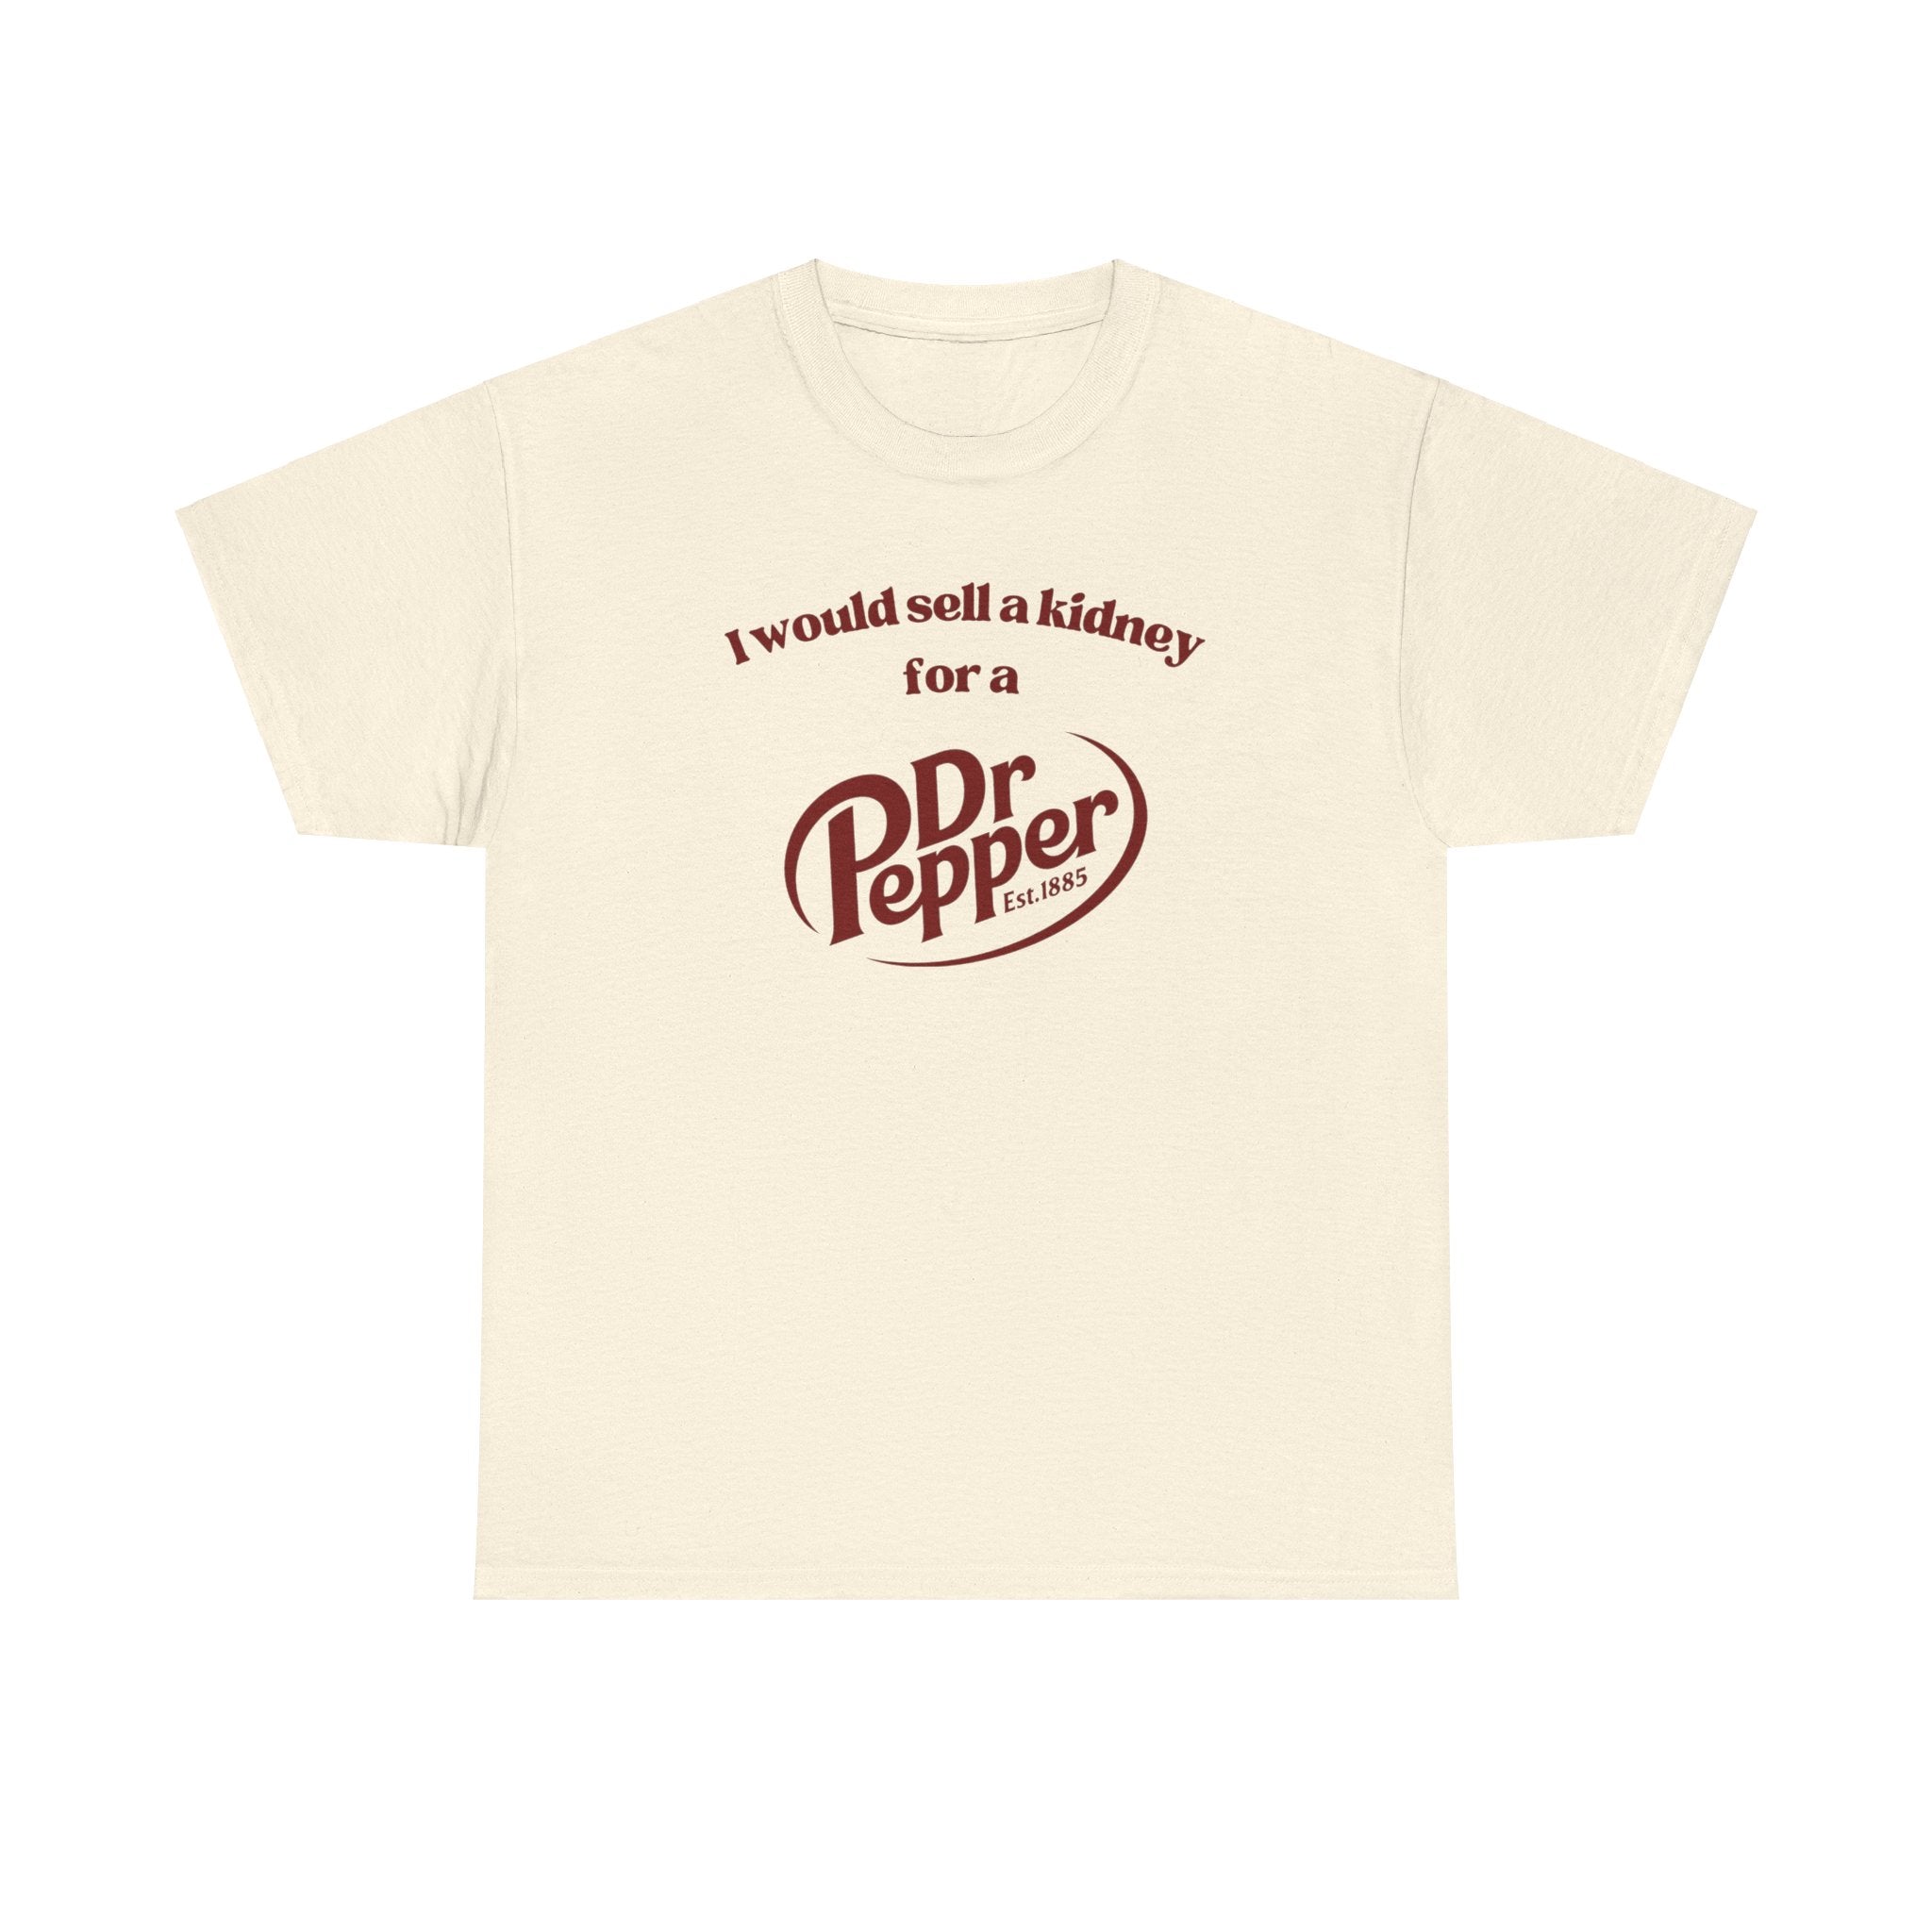 I would sell a kidney for a Dr. Pepper